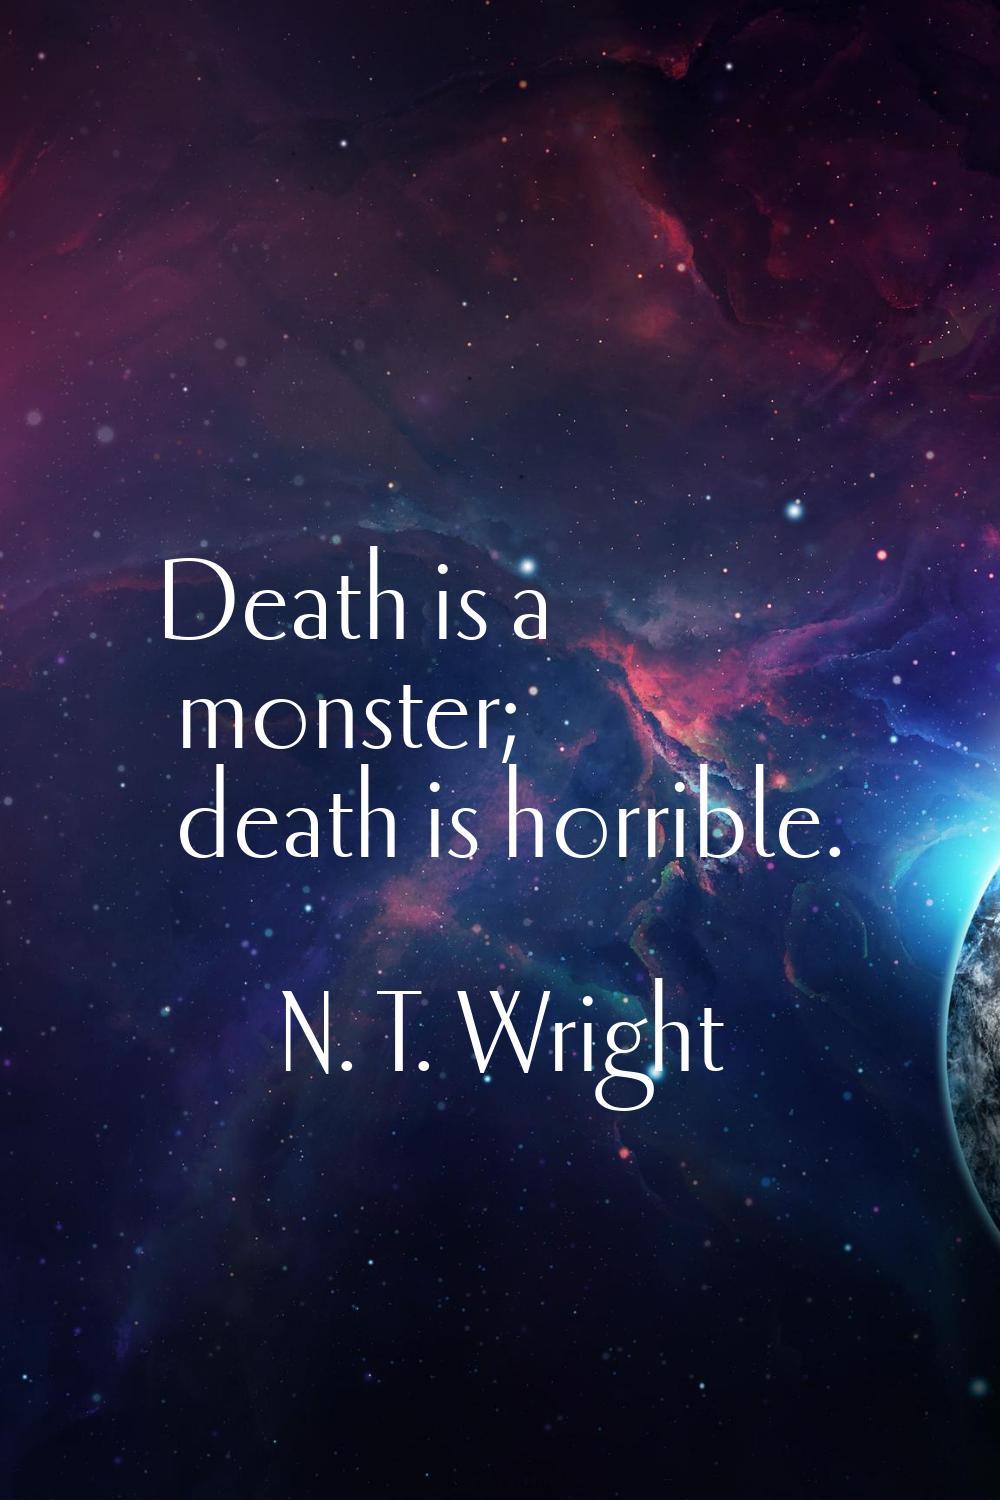 Death is a monster; death is horrible.